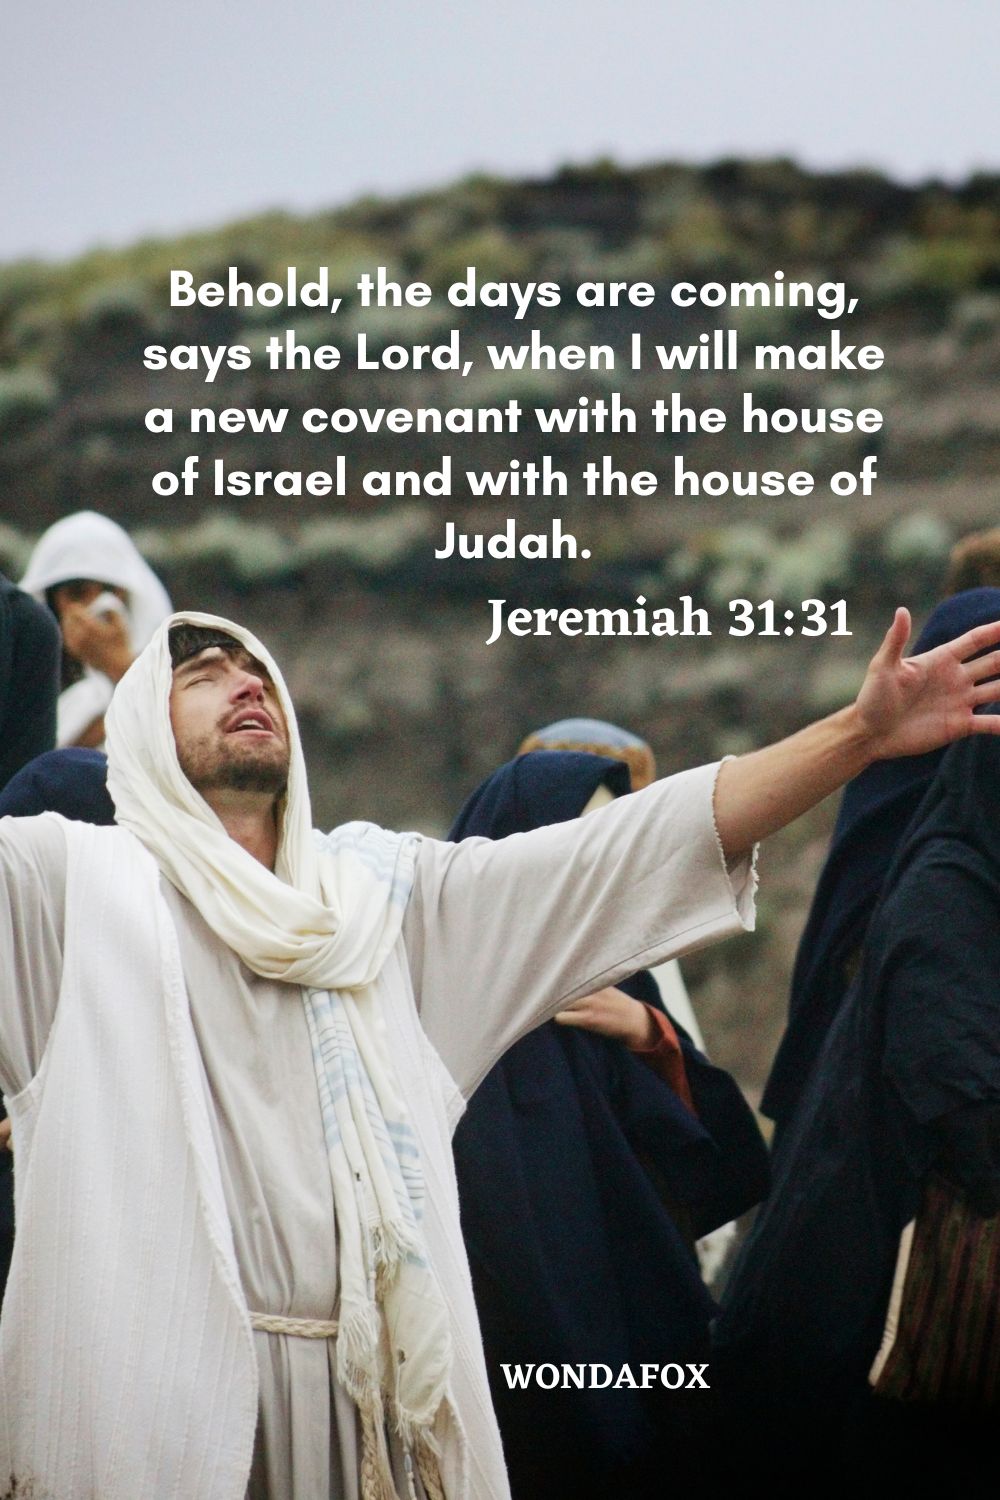 Behold, the days are coming, says the Lord, when I will make a new covenant with the house of Israel and with the house of Judah.
Jeremiah 31:31